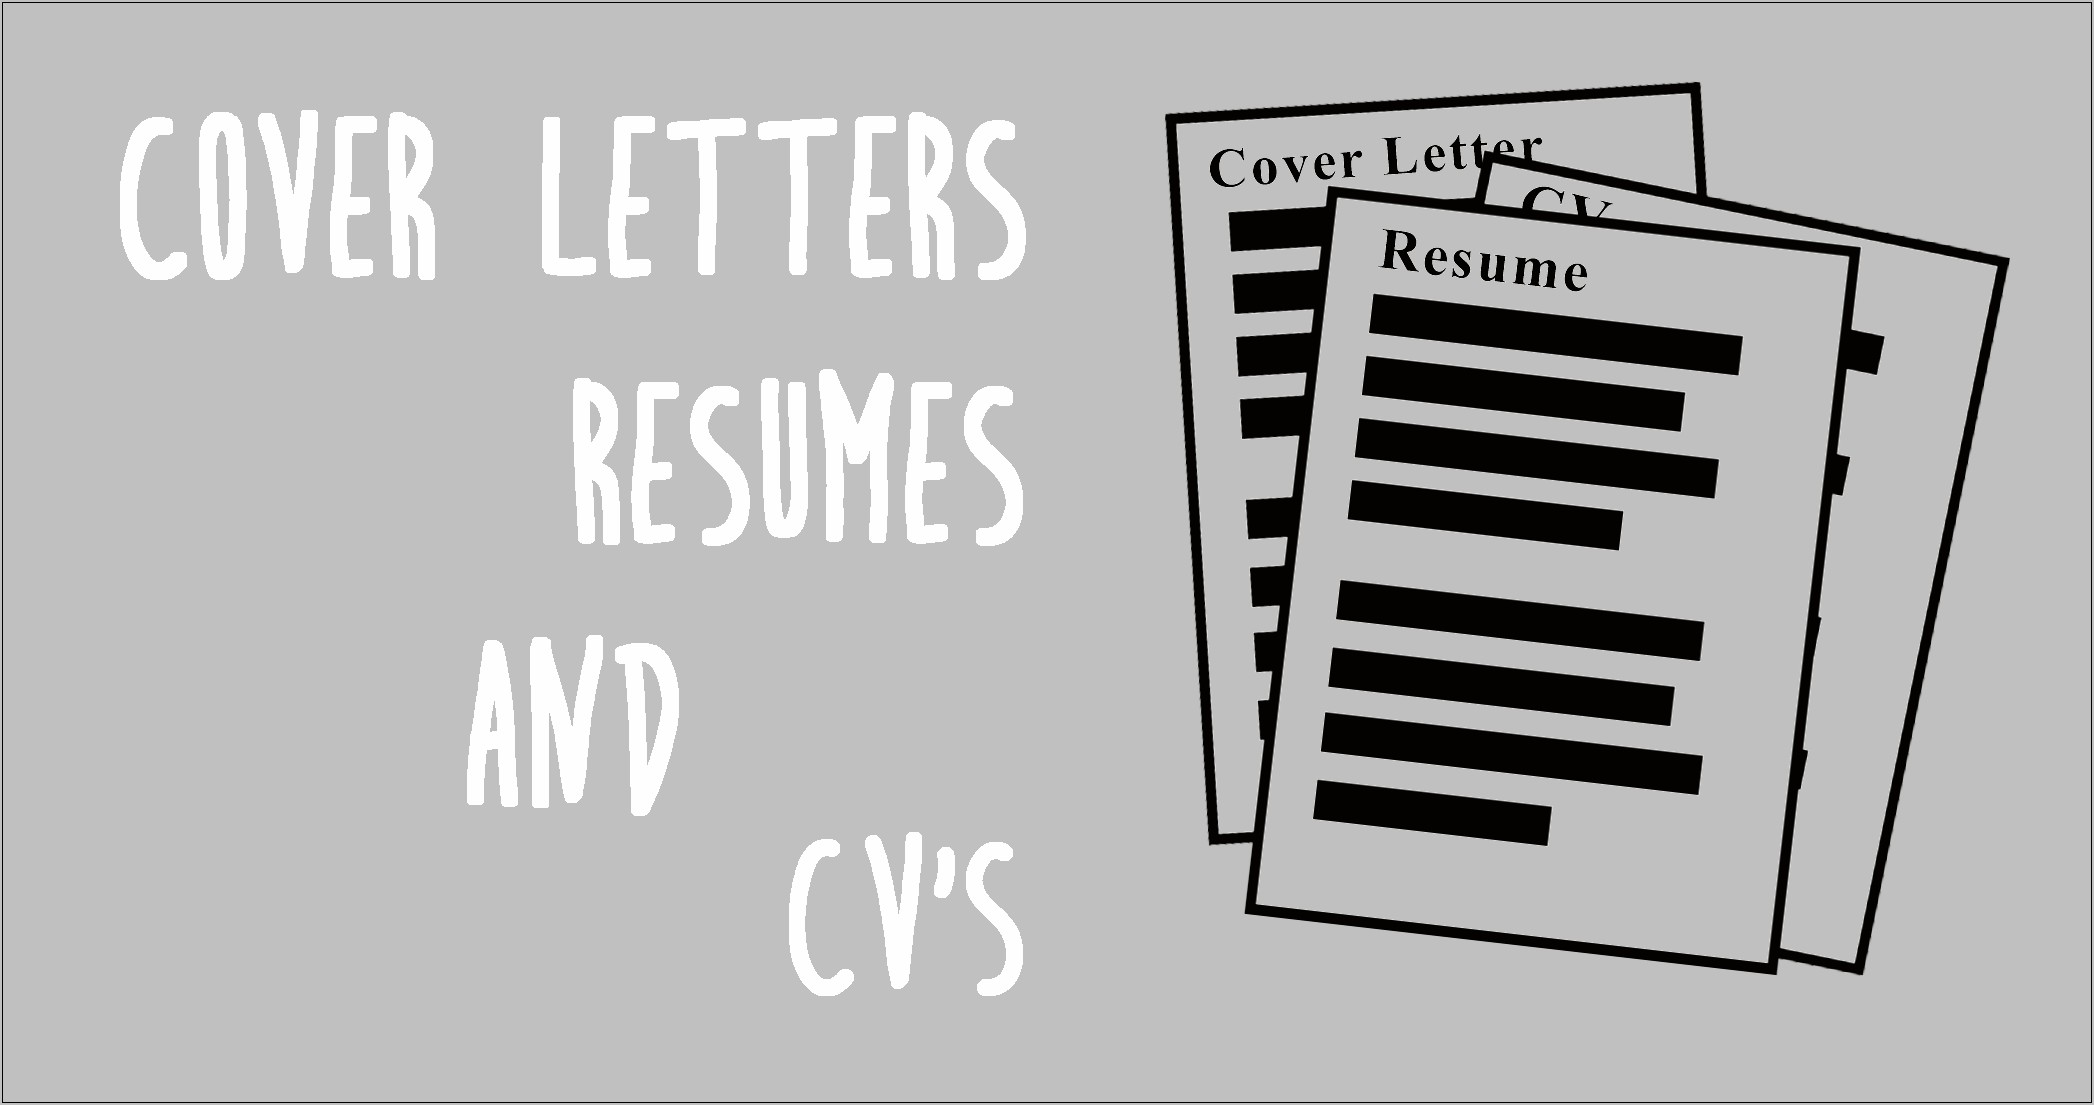 Cover Letter To Send A Resume